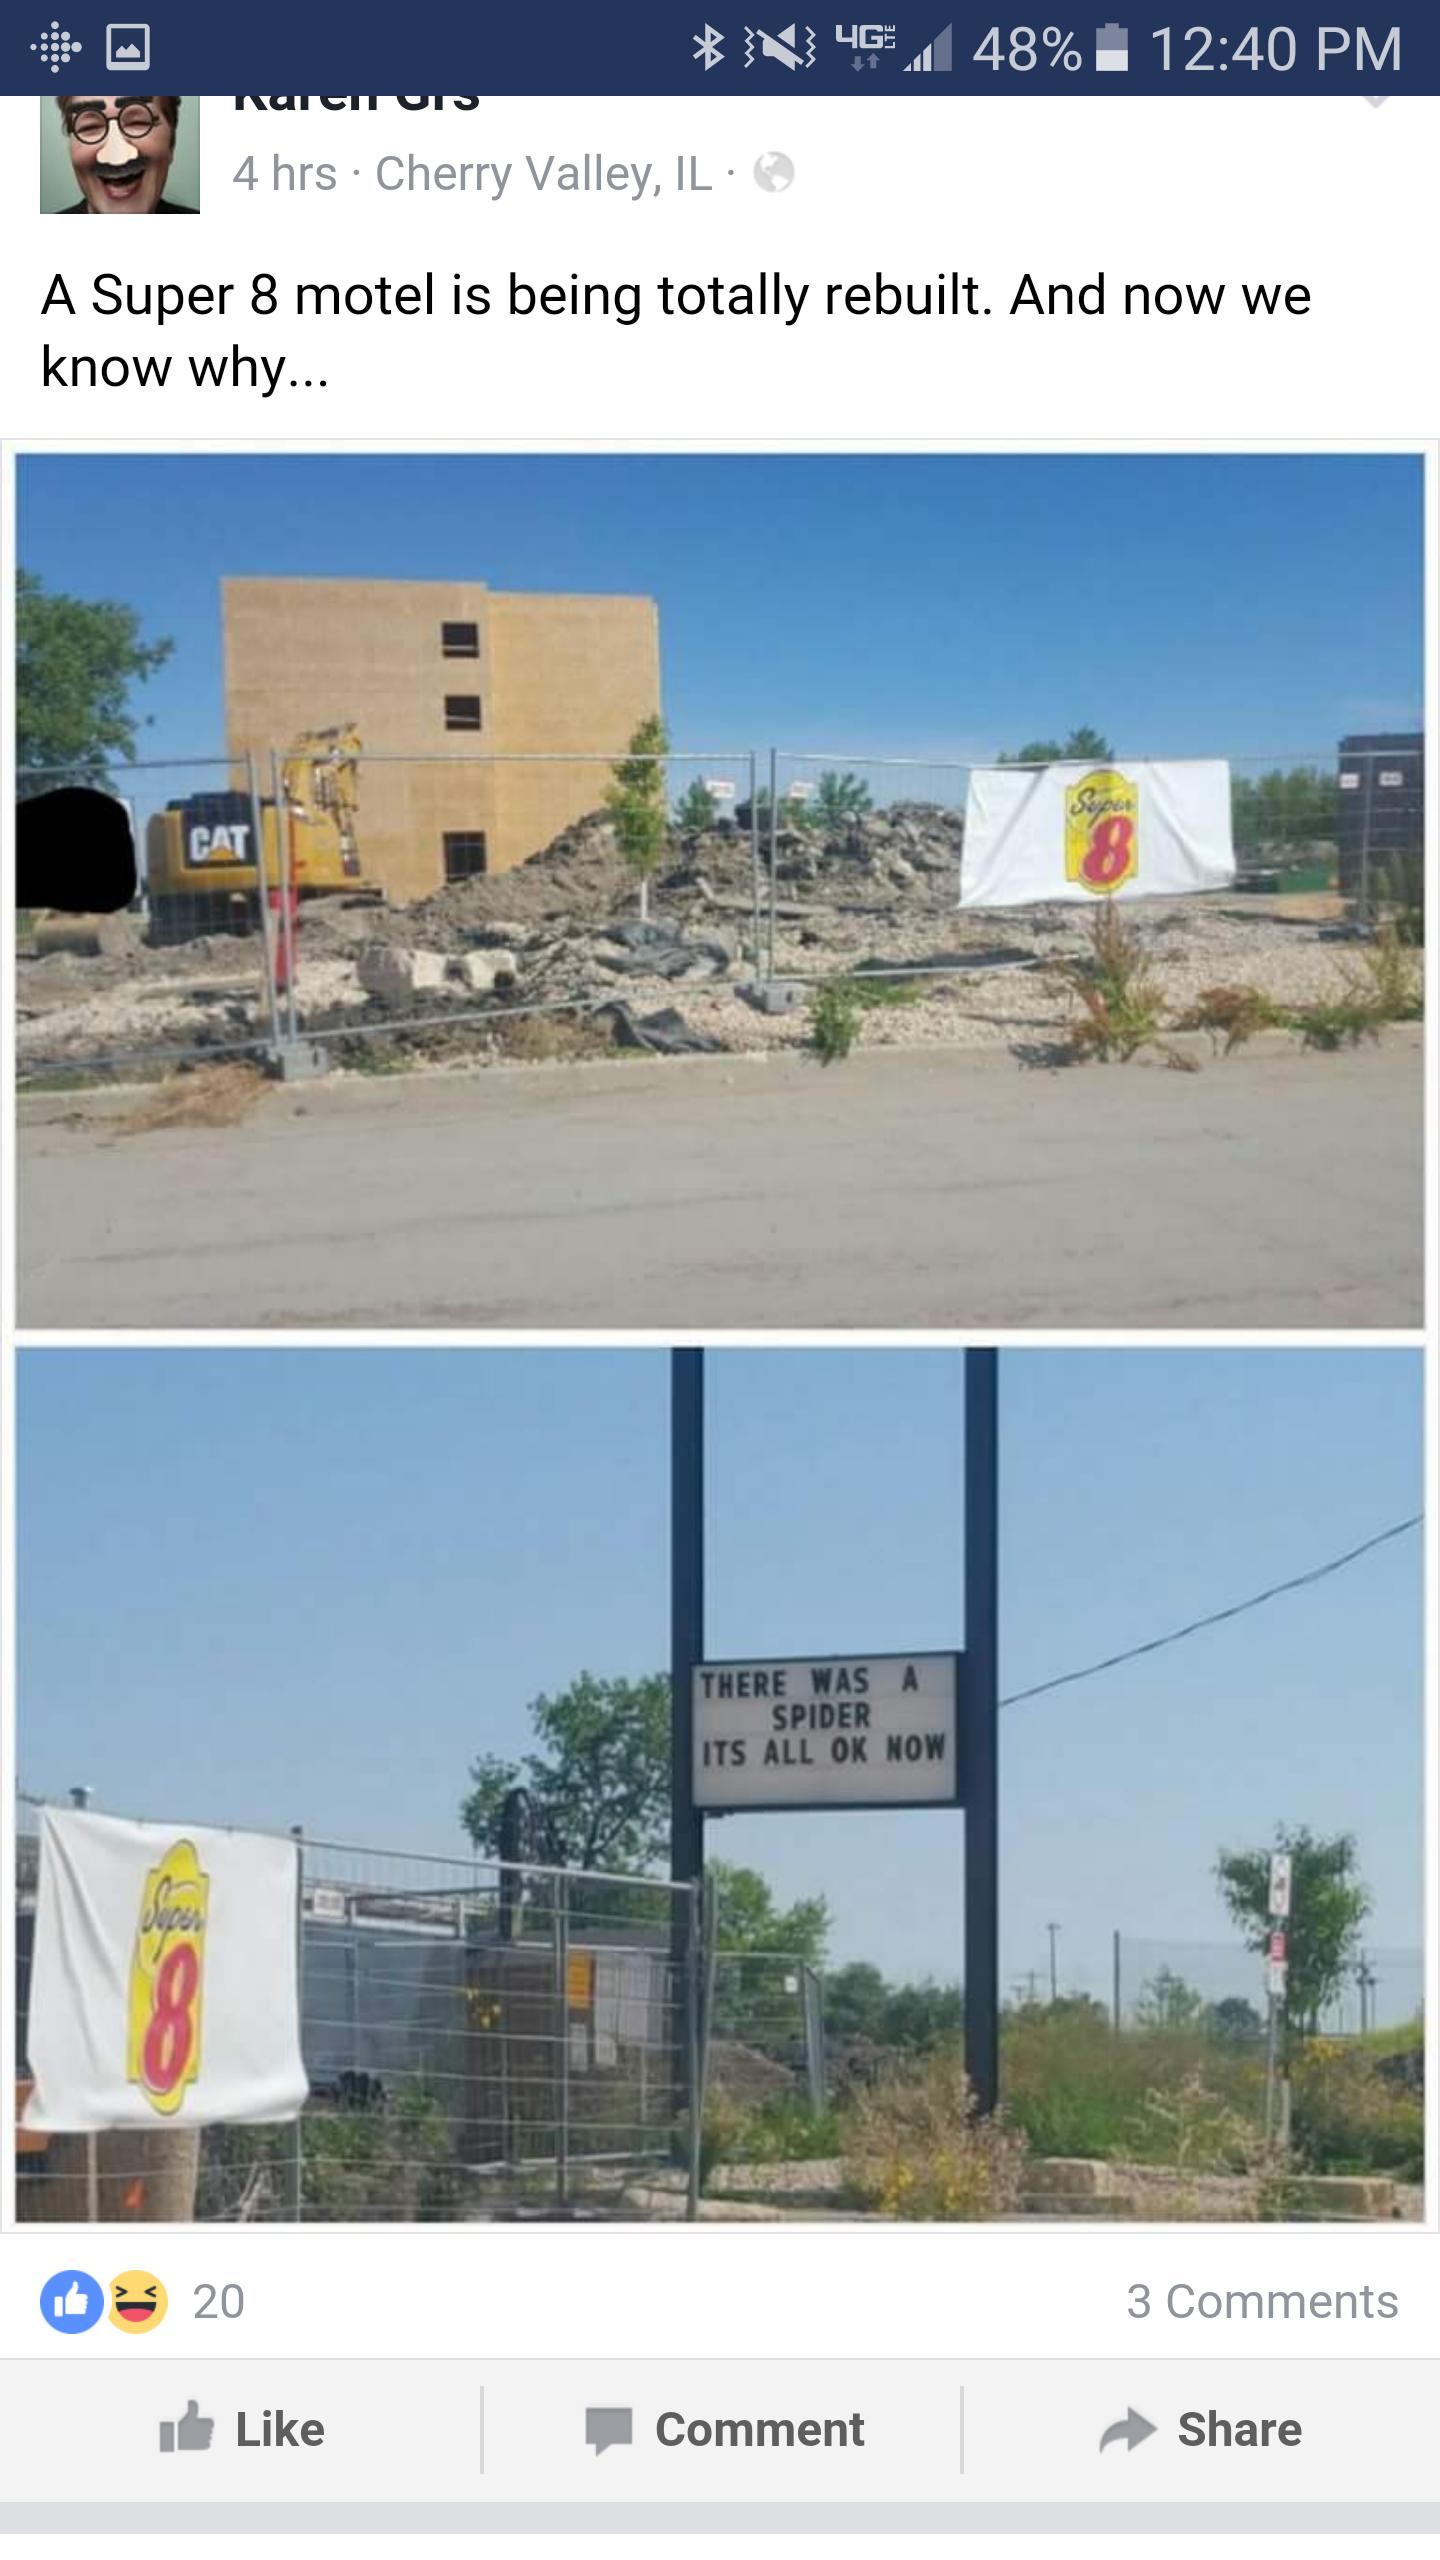 super 8 memes - N 4G 48% 4 hrs Cherry Valley, Il A Super 8 motel is being totally rebuilt. And now we know why... Cat There Was A Spider Its All Ok Now O 20 3 Comment